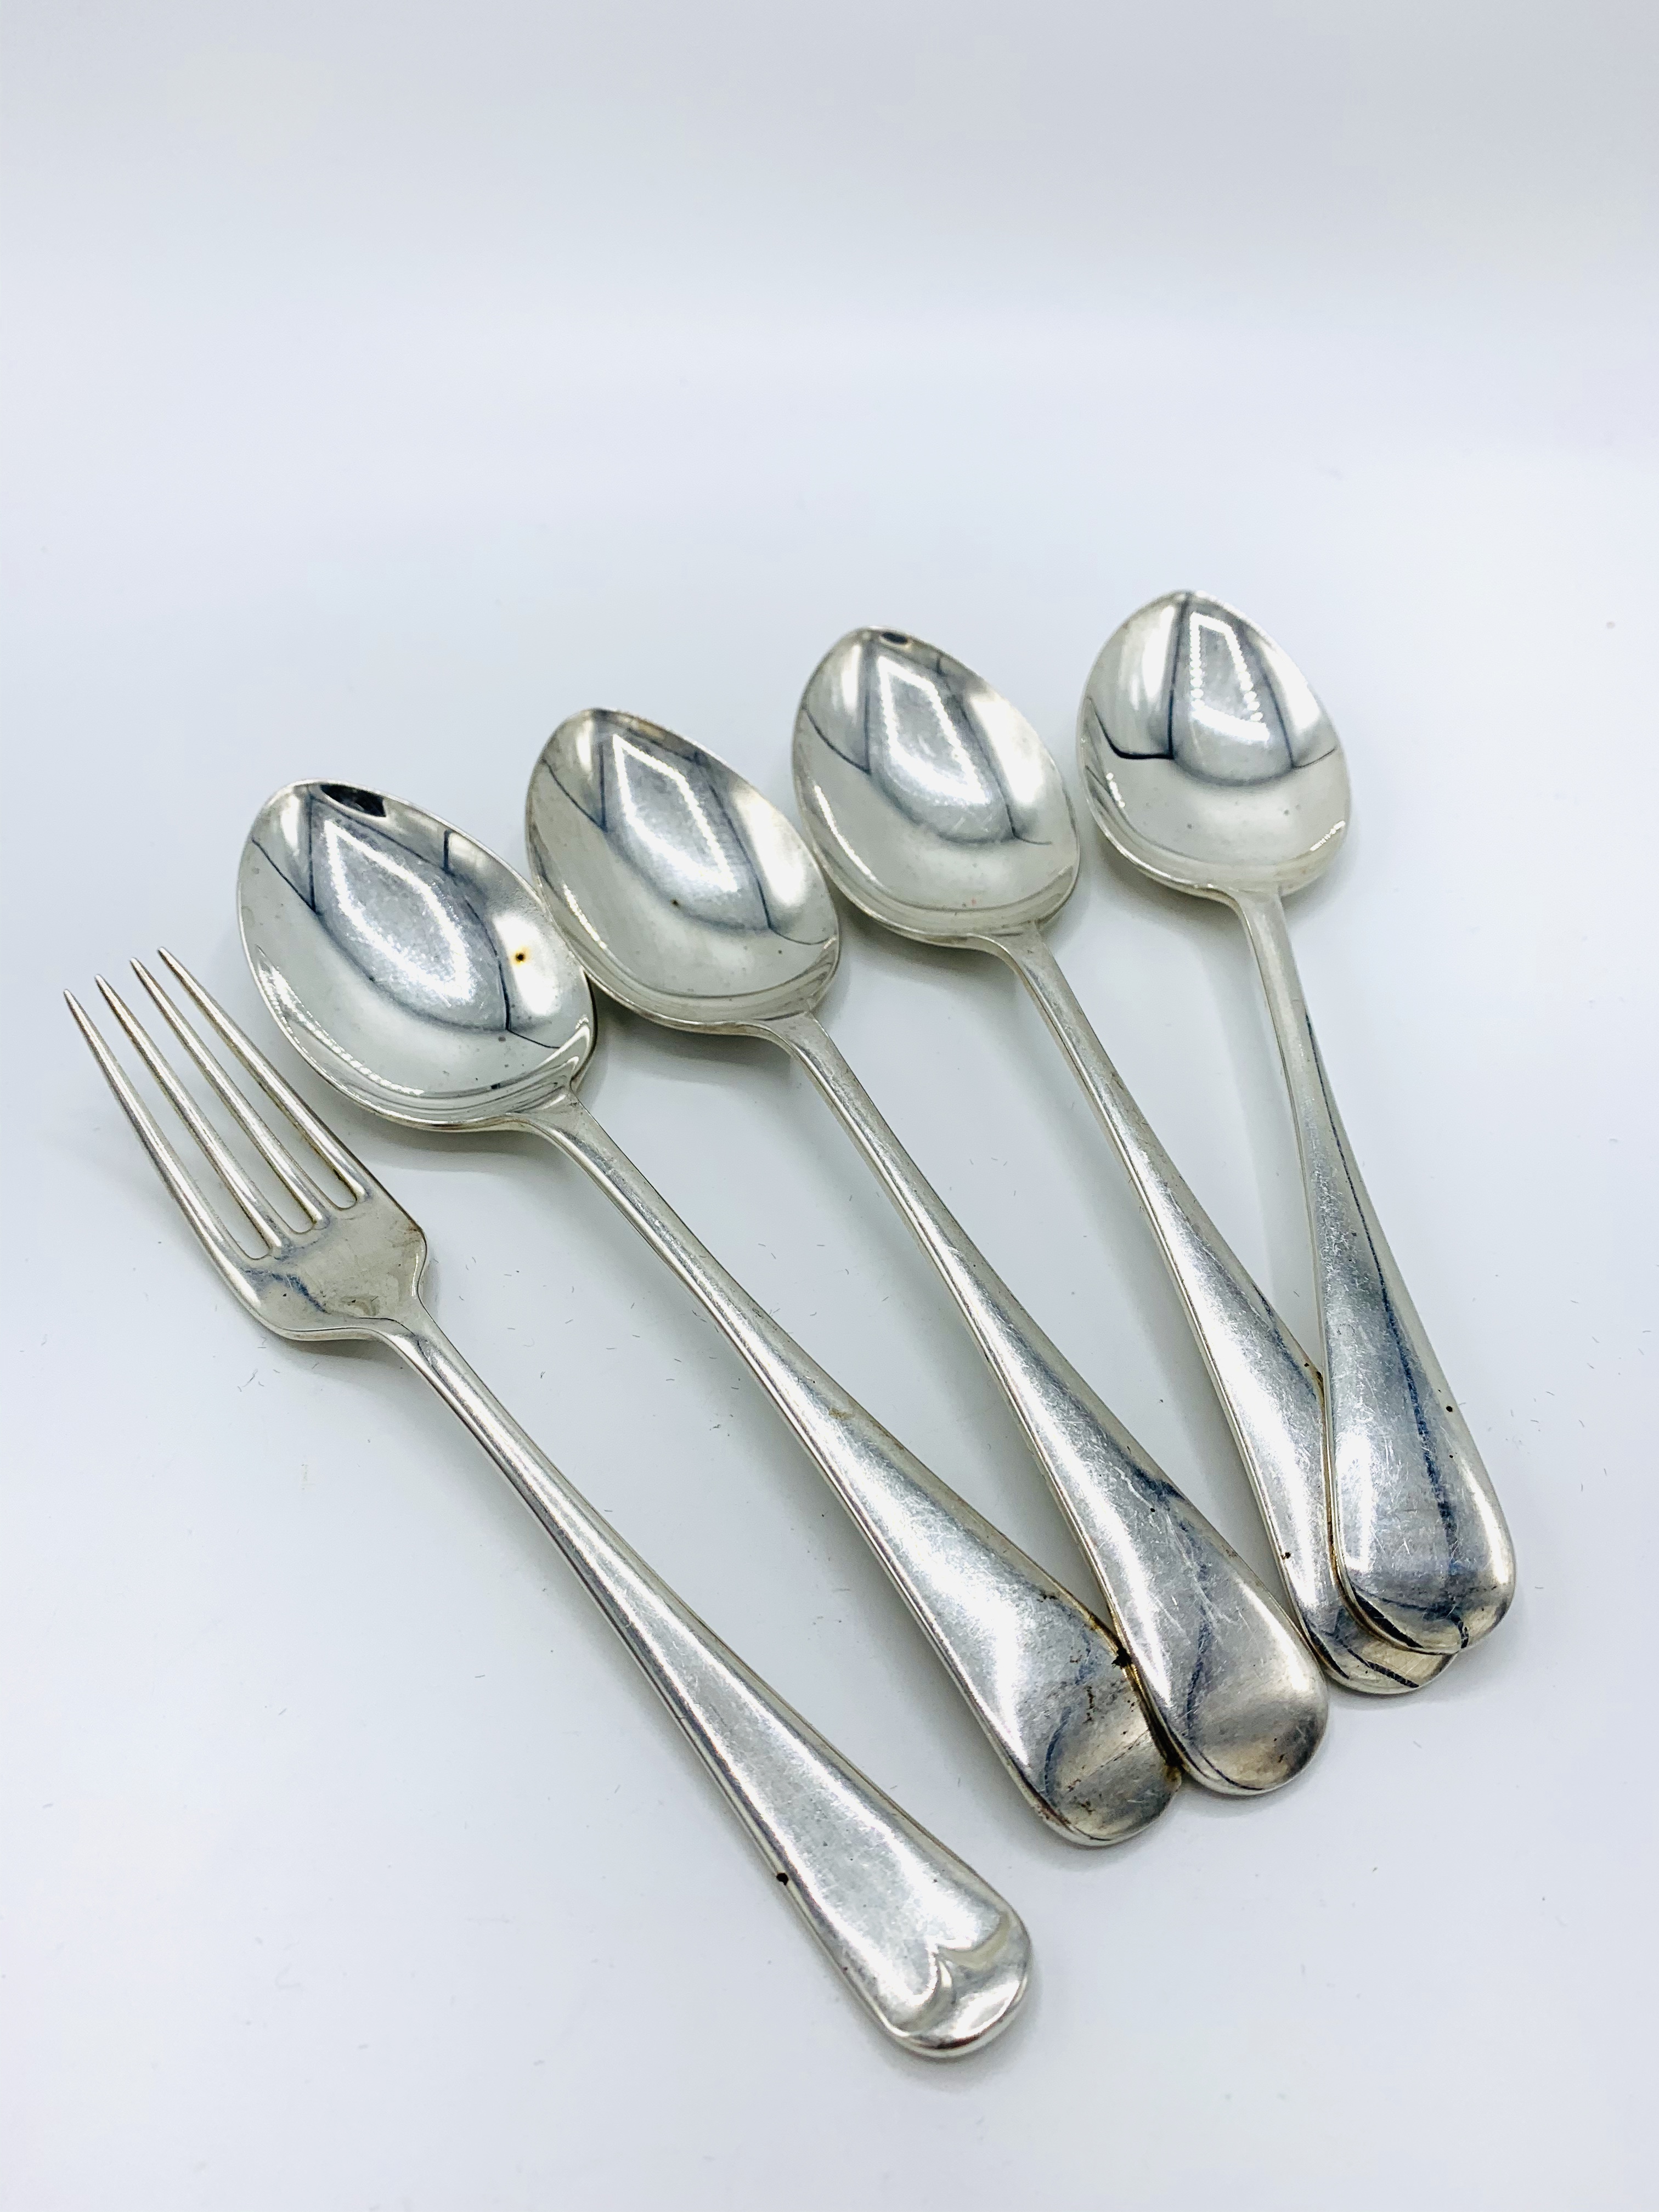 Hallmarked silver set of 4 dessert spoons and a single side fork, not matching.